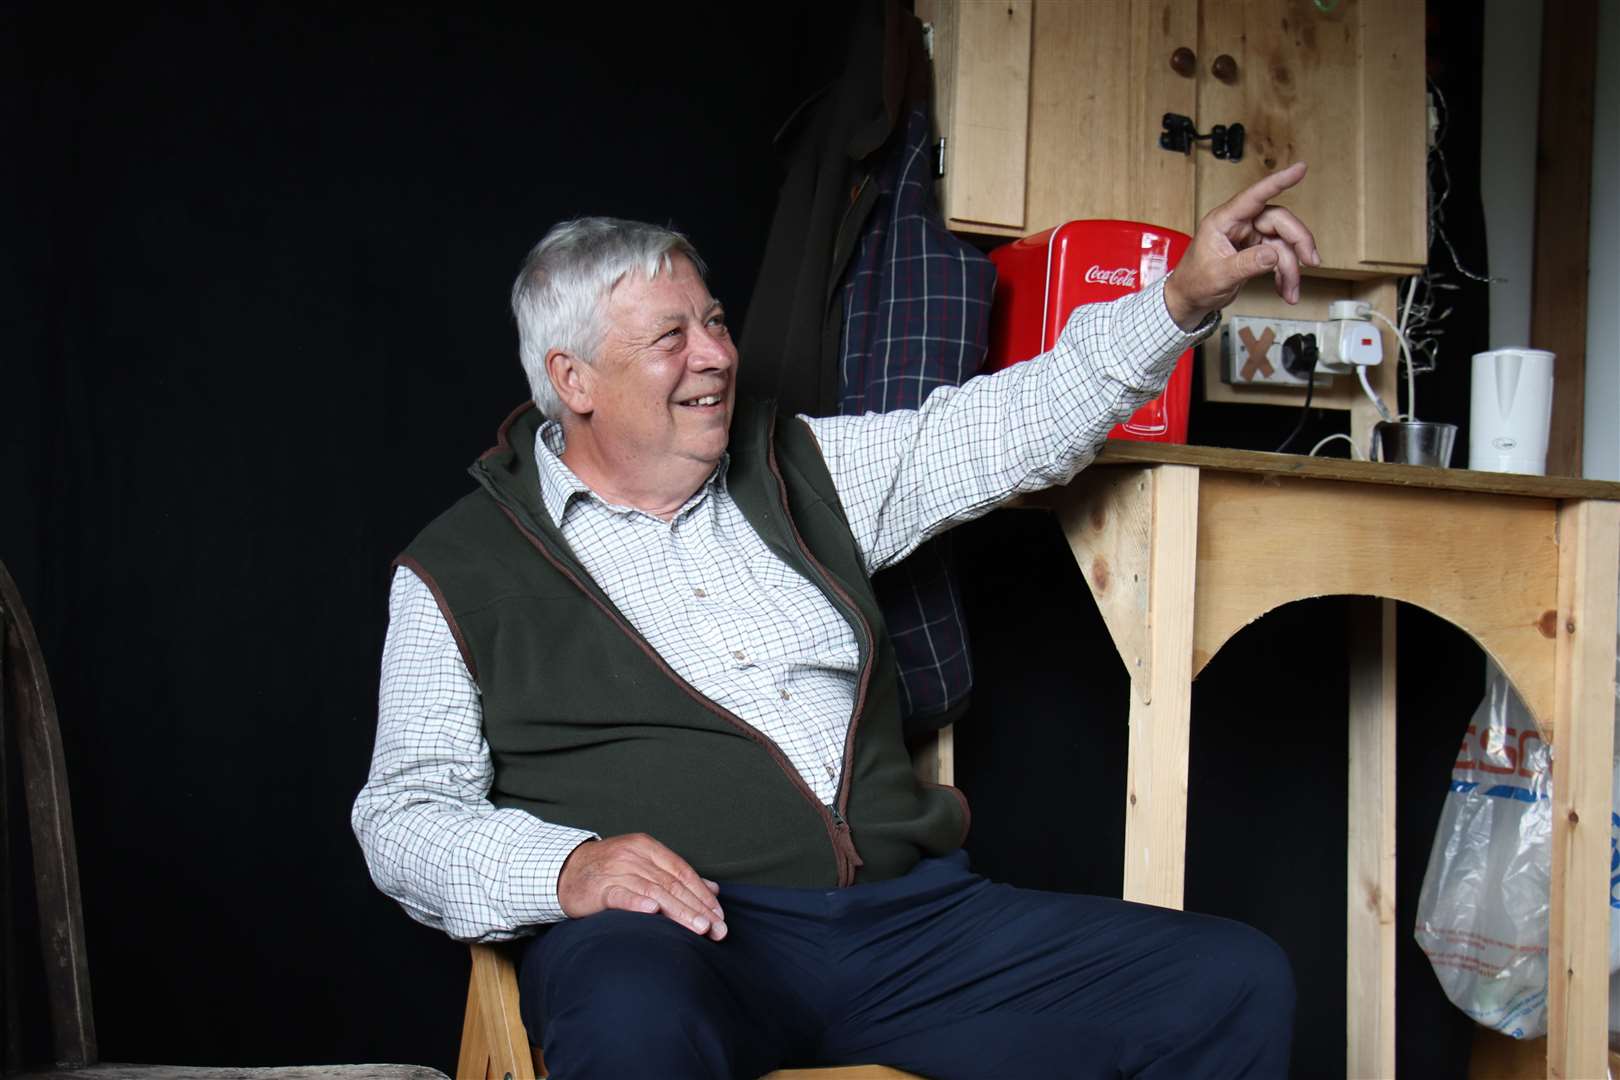 Actor Ron Emslie performing Man Shed.